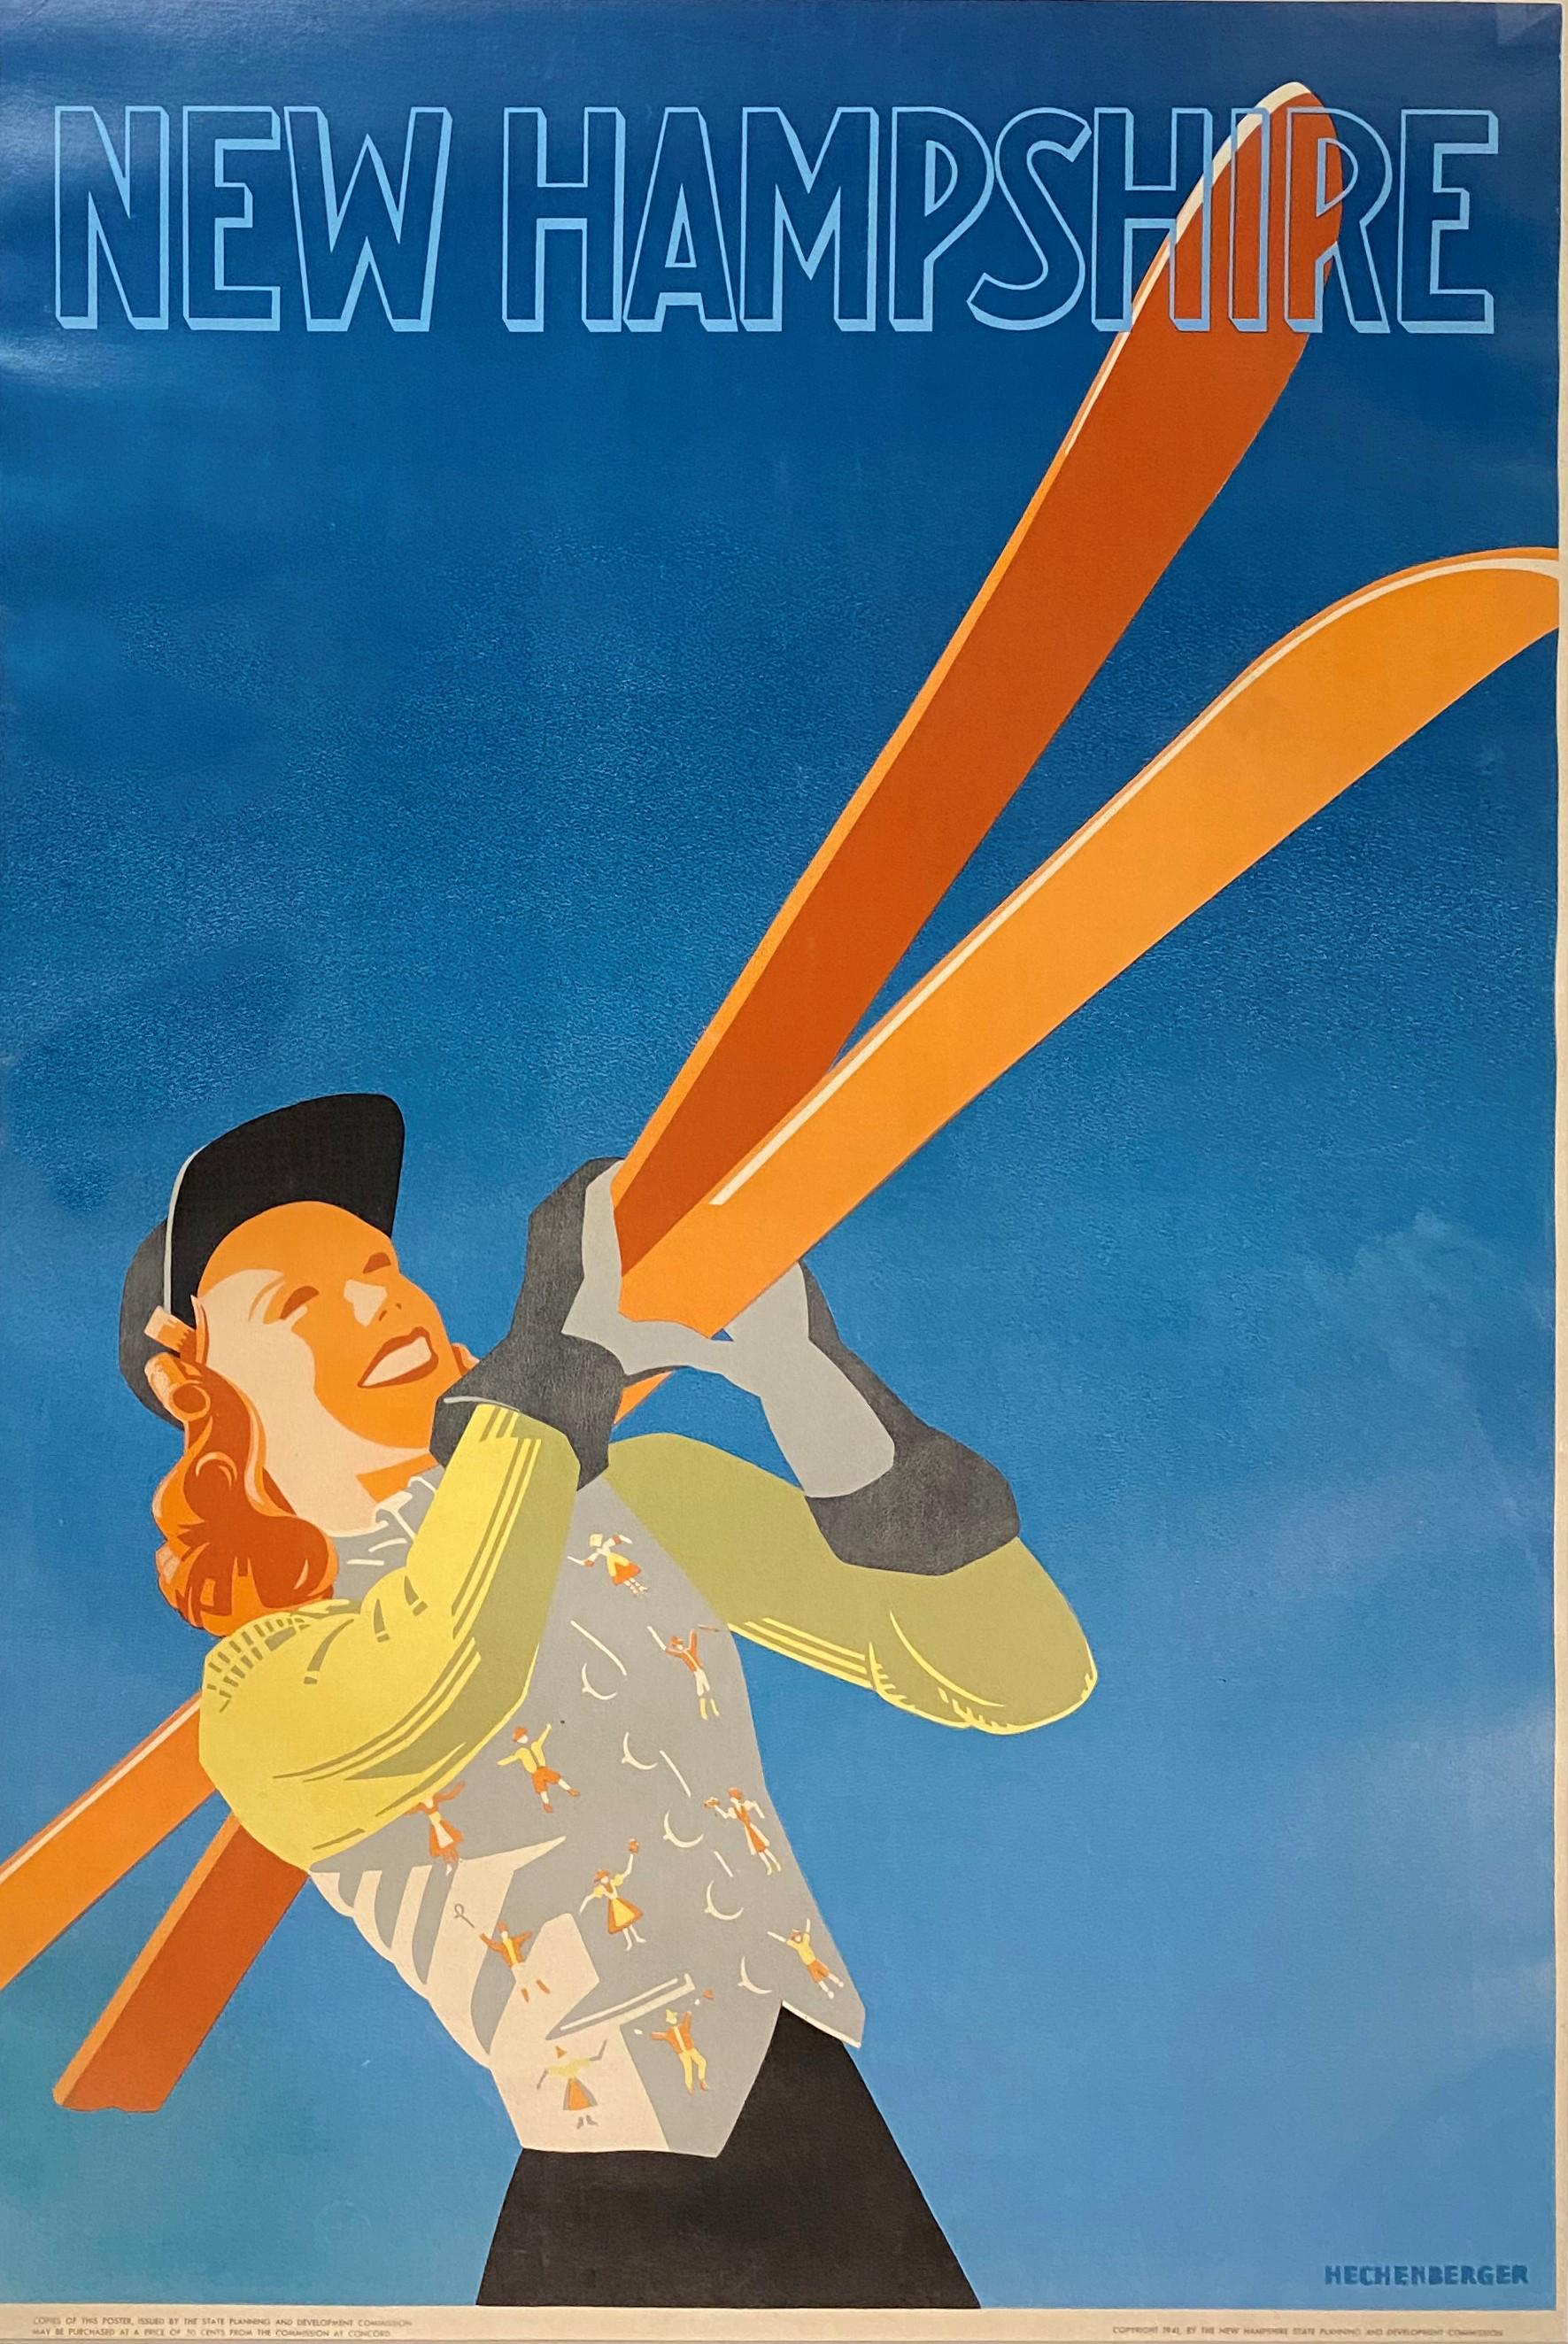 A colorful Art Deco style ski promotion poster for the White Mountains in the state of New Hampshire, one of two posters created for the state by the artist Lou Hechenberger (original work signed lower right). Lower left reads “Copies of this poster